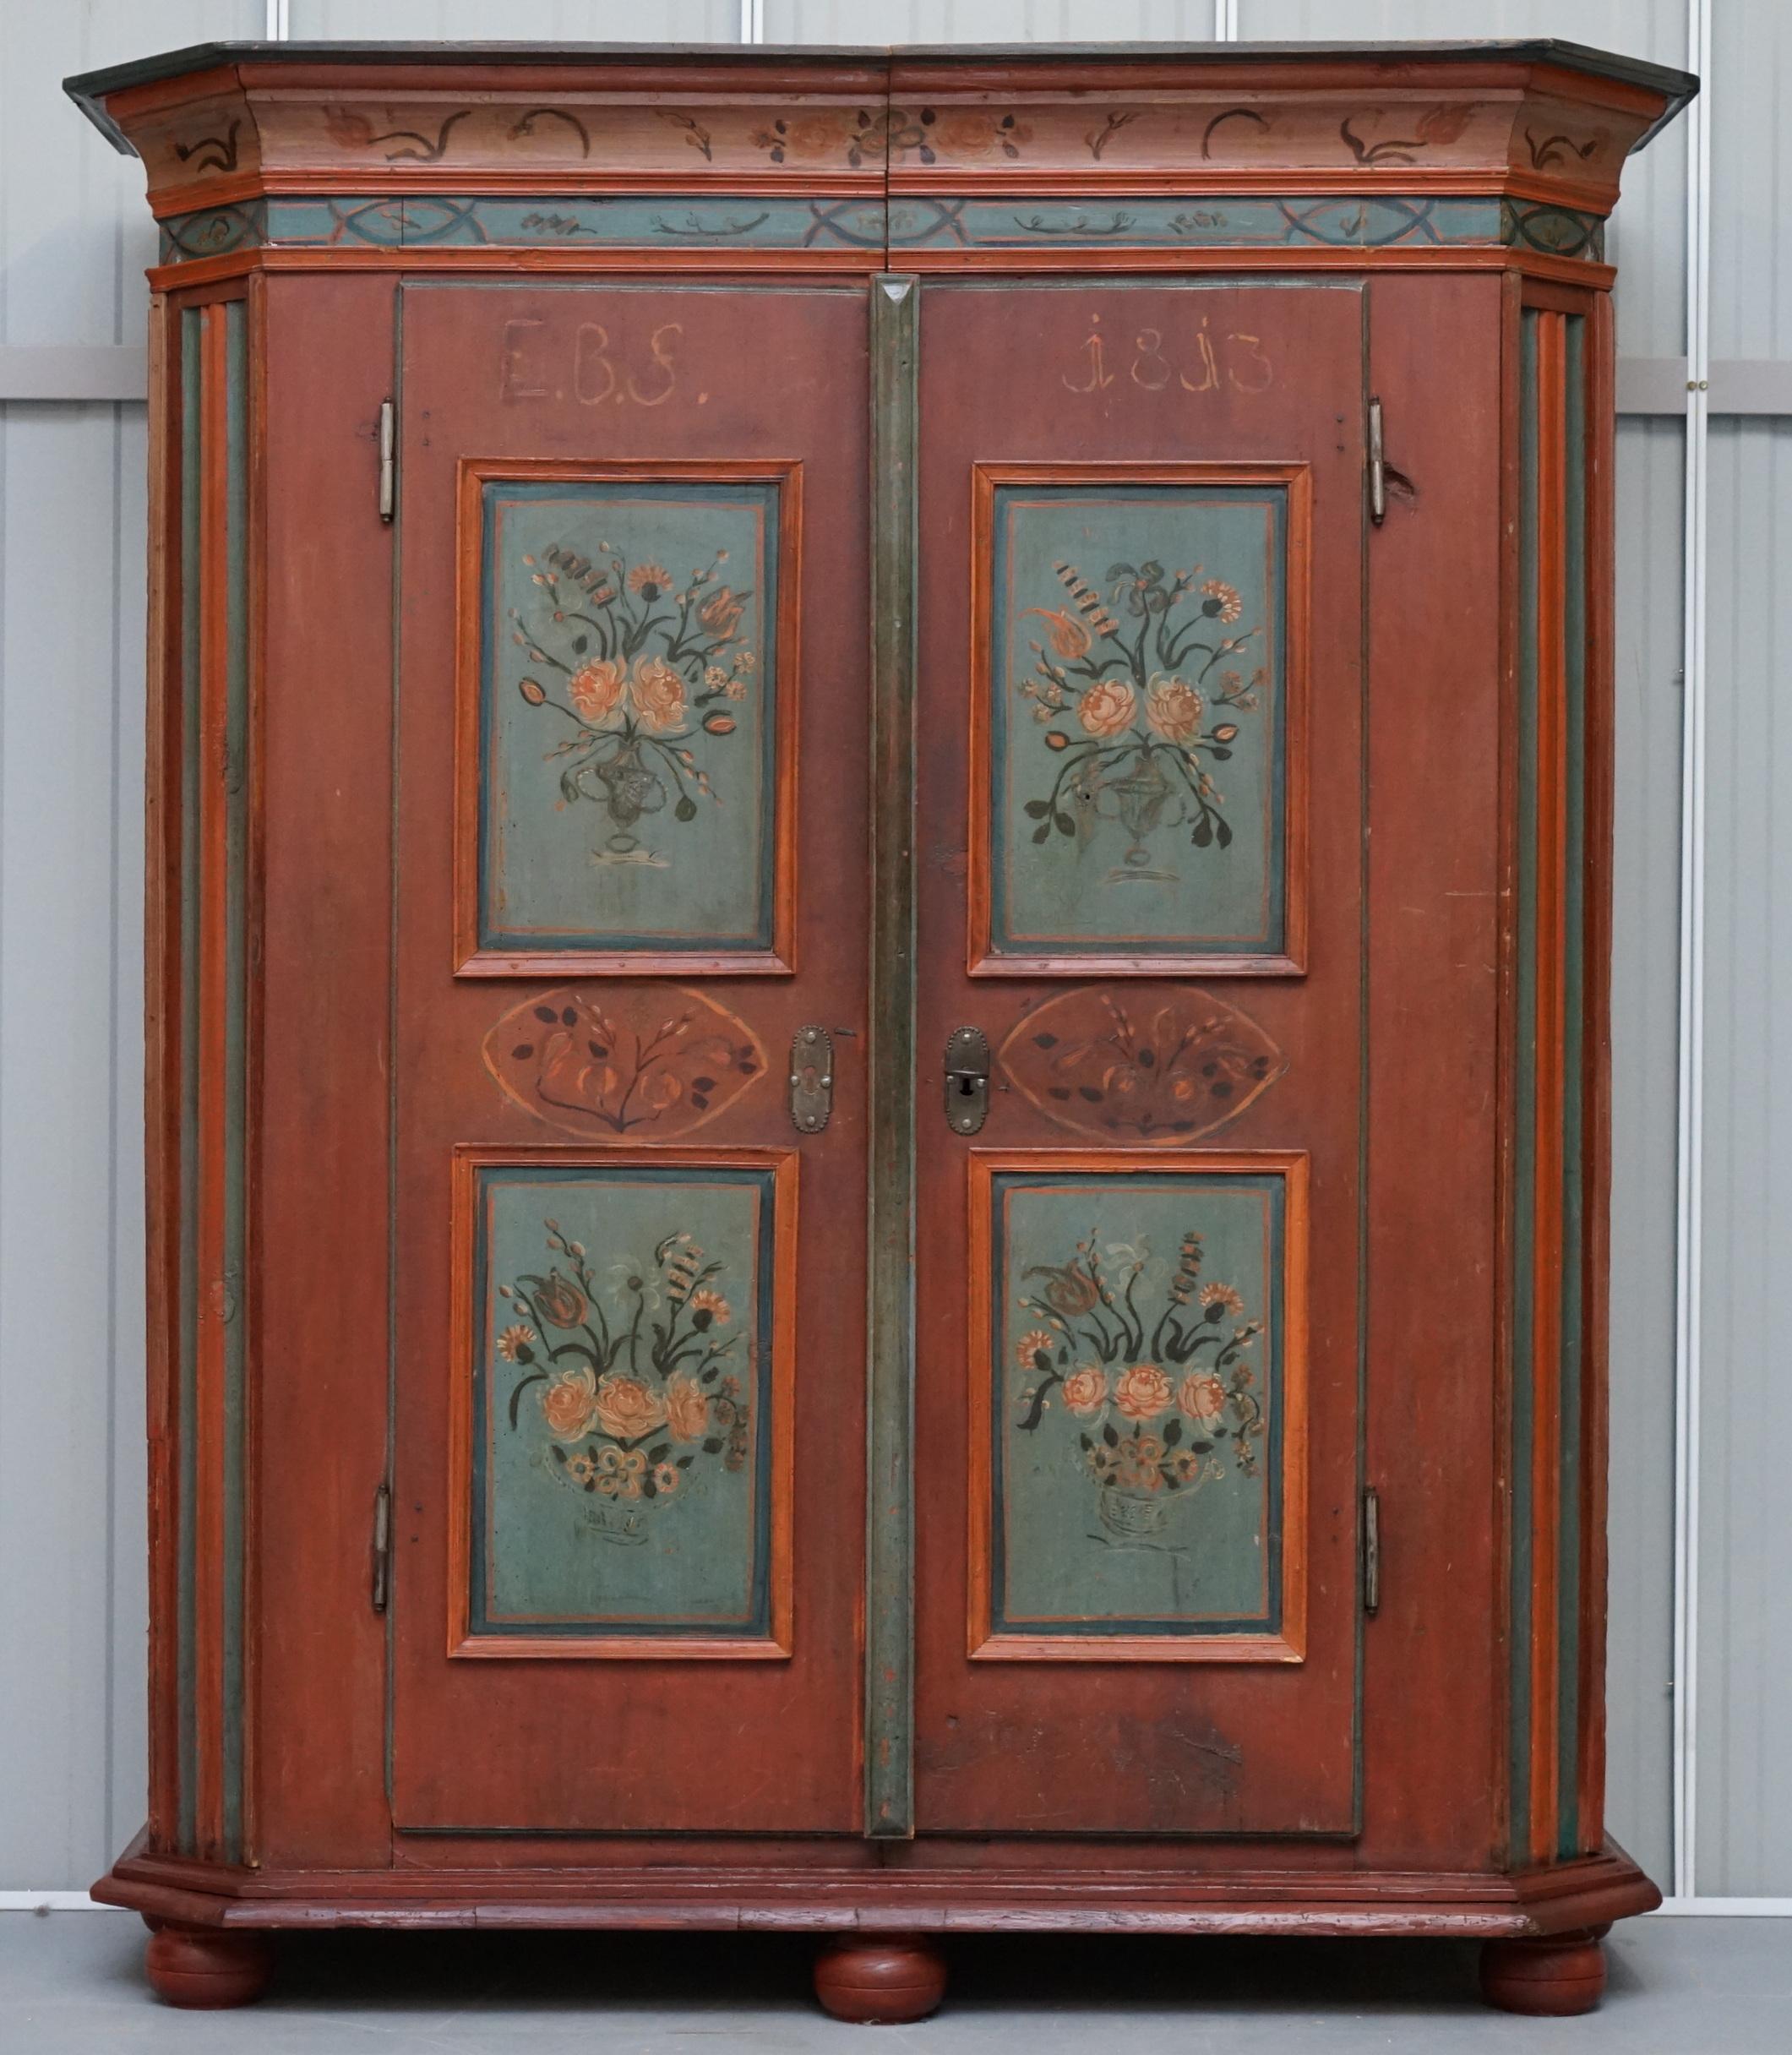 We are delighted to offer for sale this very rare dated 1813 hand painted Austrian wardrobe

A very rare find, naively painted with flowers, it’s all original, the lock has been restored and works perfectly, it looks like a piece of art

The